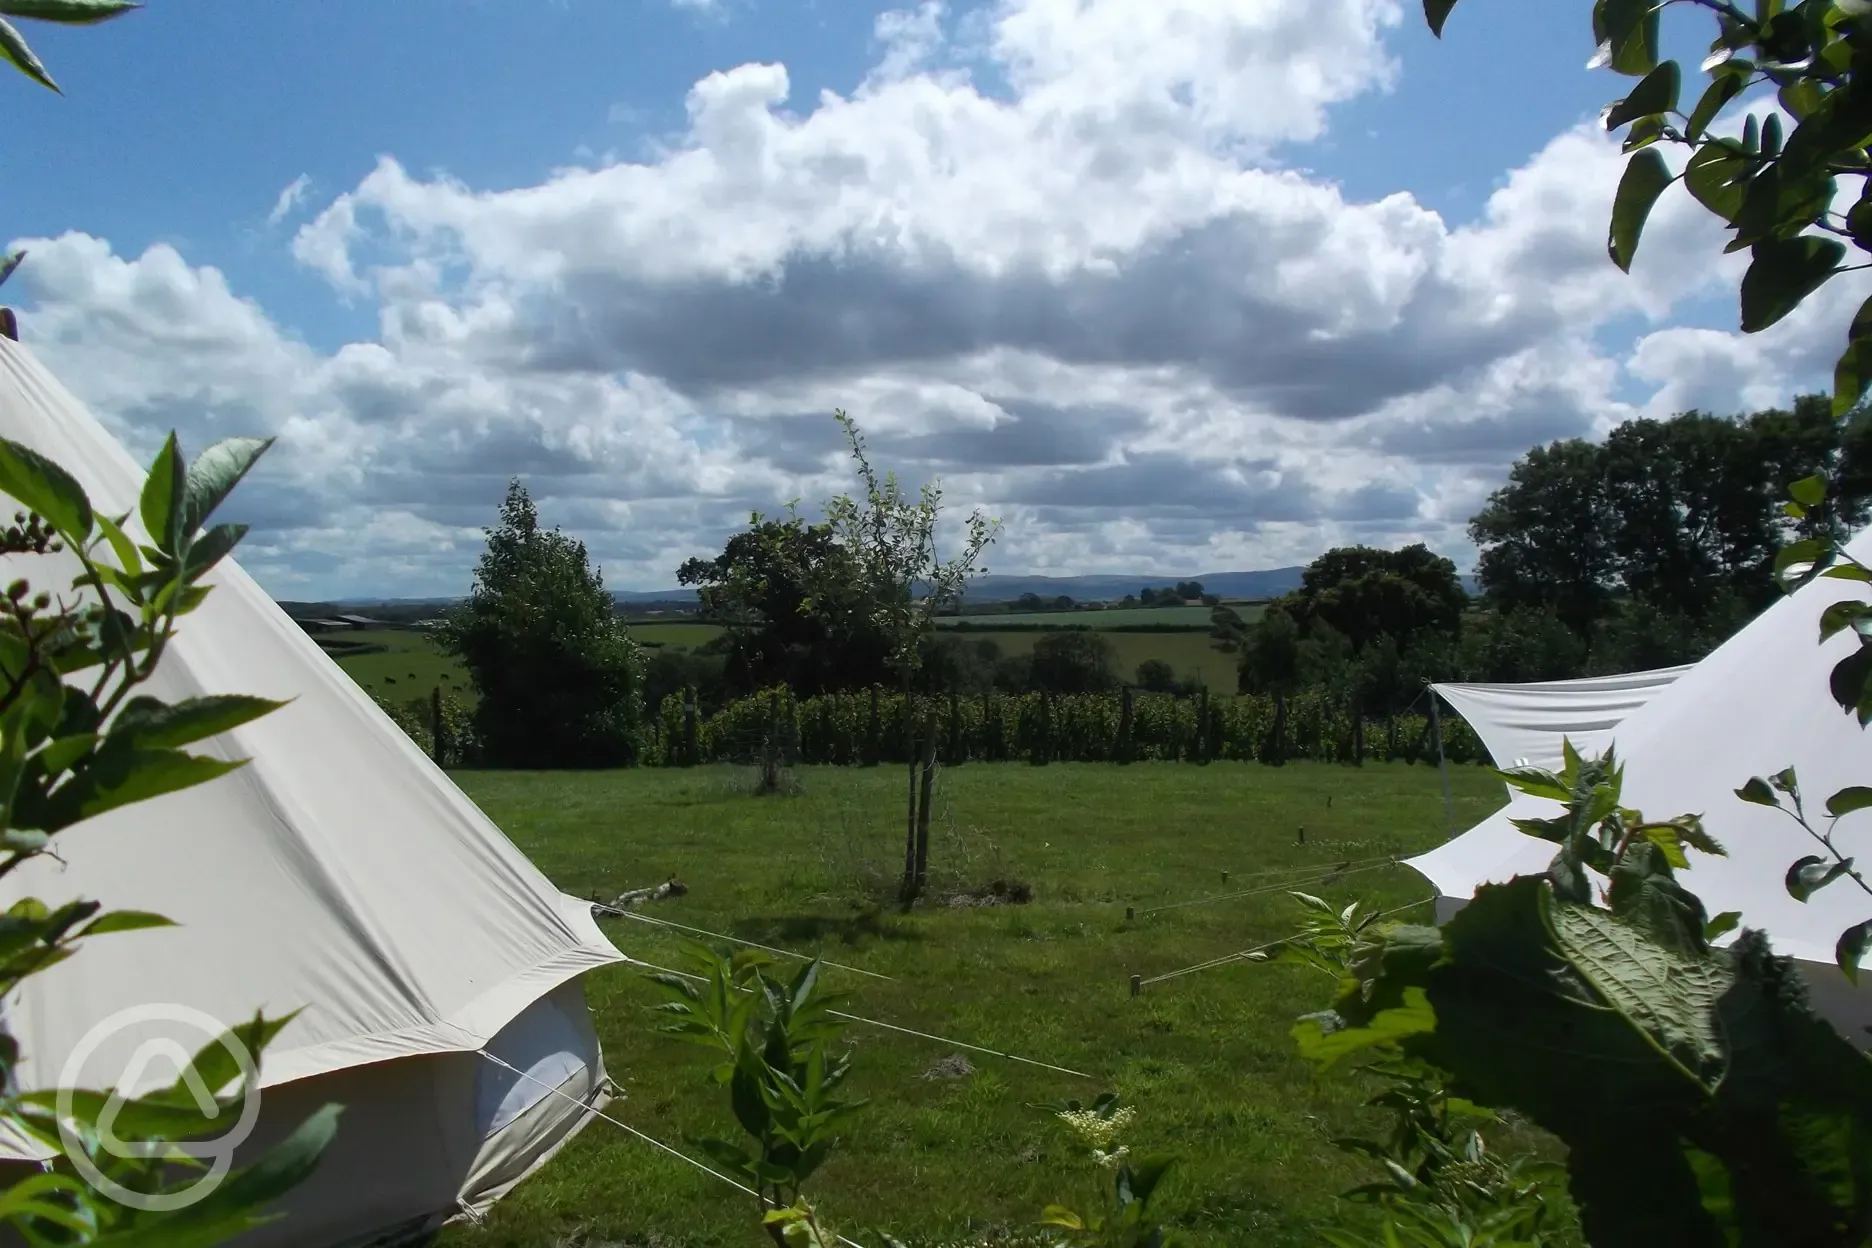 Stay in one of our two spacious unfurnished bell tents